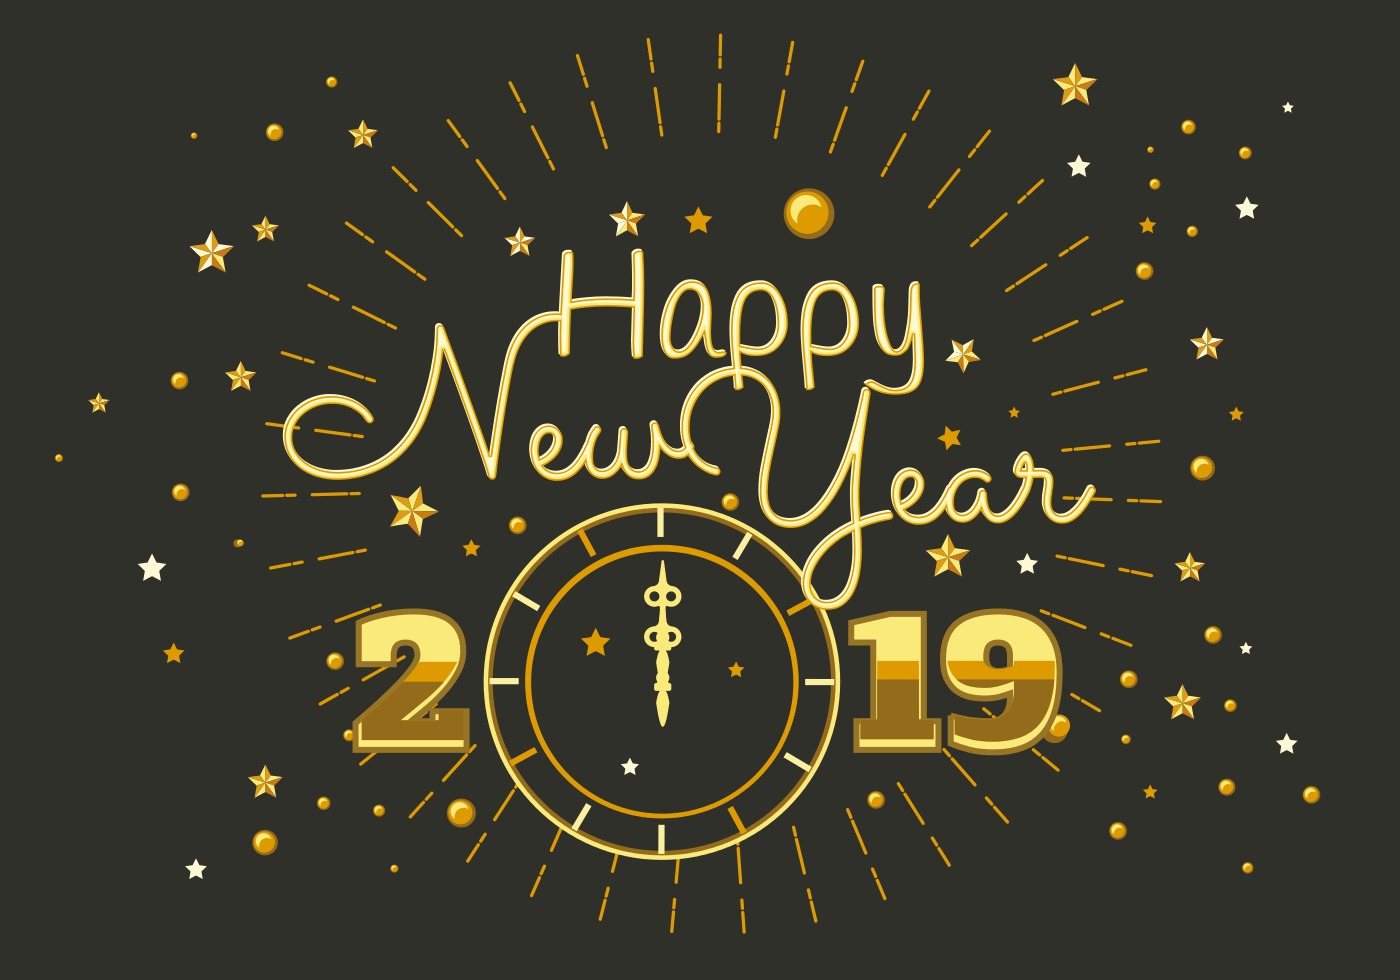 Happy New Year 2018 Typography Vector - Download Free ...